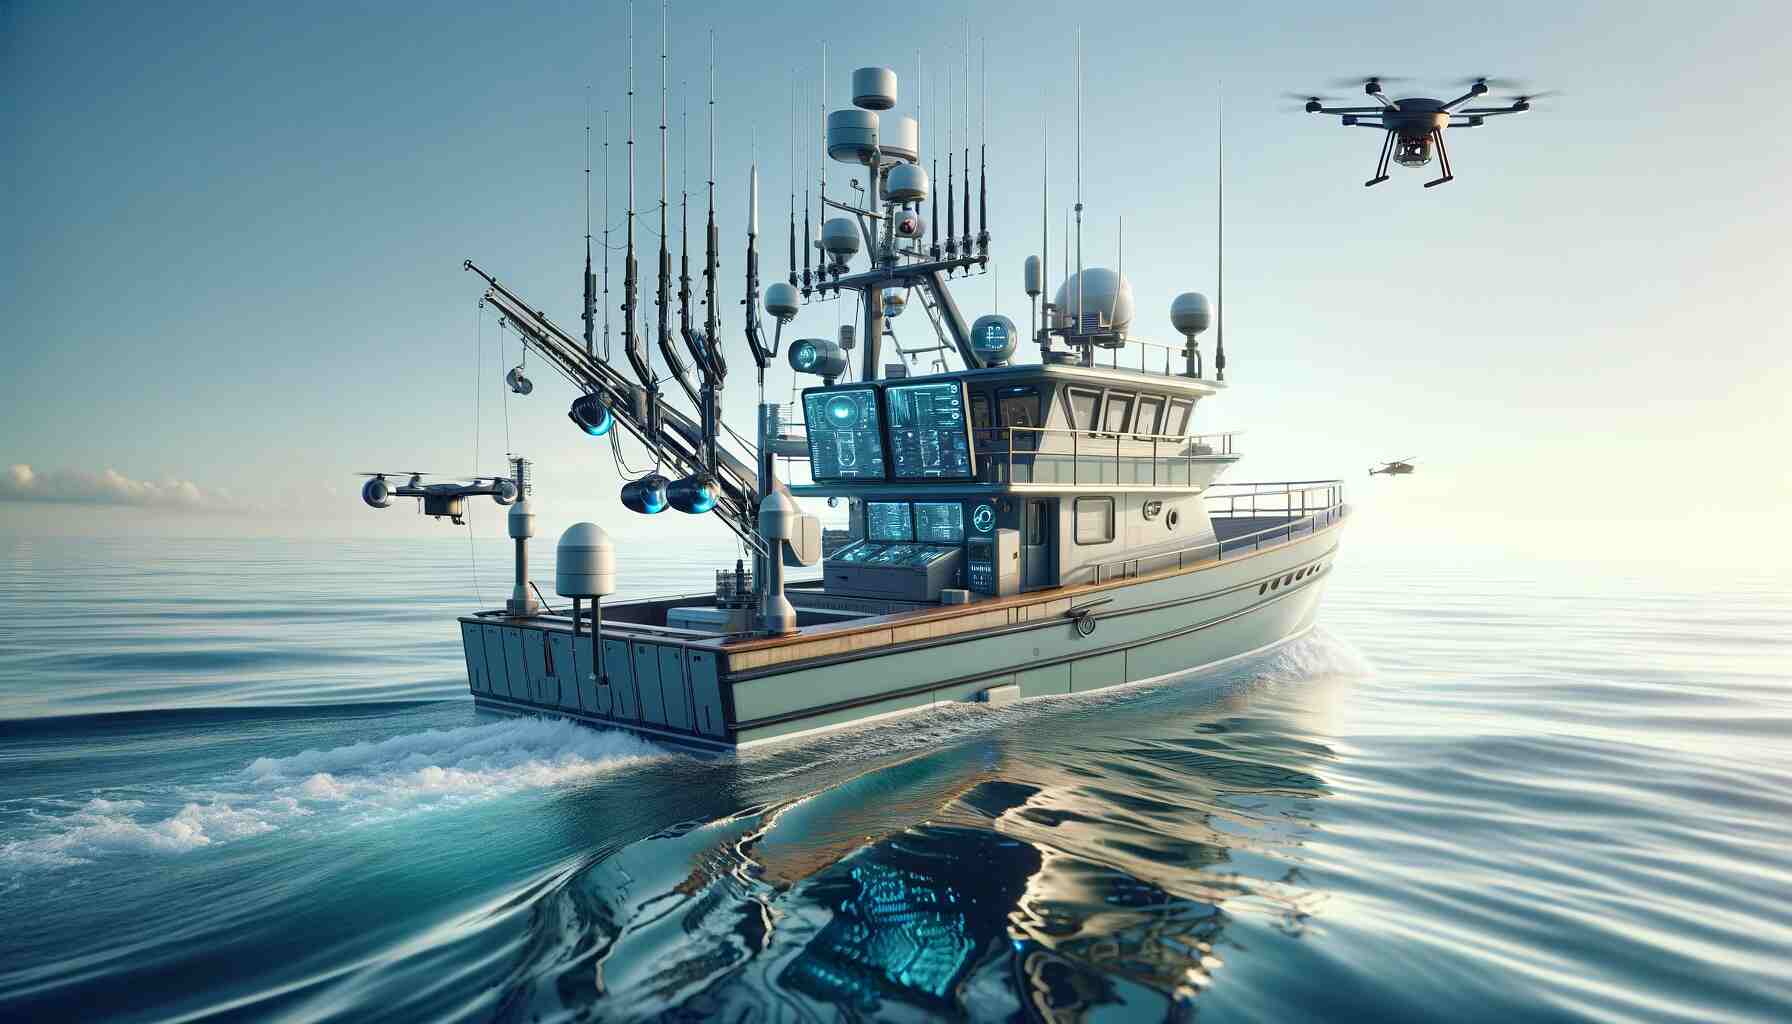 Here is the featured image for How AI and Tech are Transforming Fishing, depicting an advanced fishing boat equipped with modern AI technology, complete with sonar systems and underwater cameras. The serene ocean setting and the presence of a drone near the boat visually represent the blend of traditional fishing methods with futuristic technology.